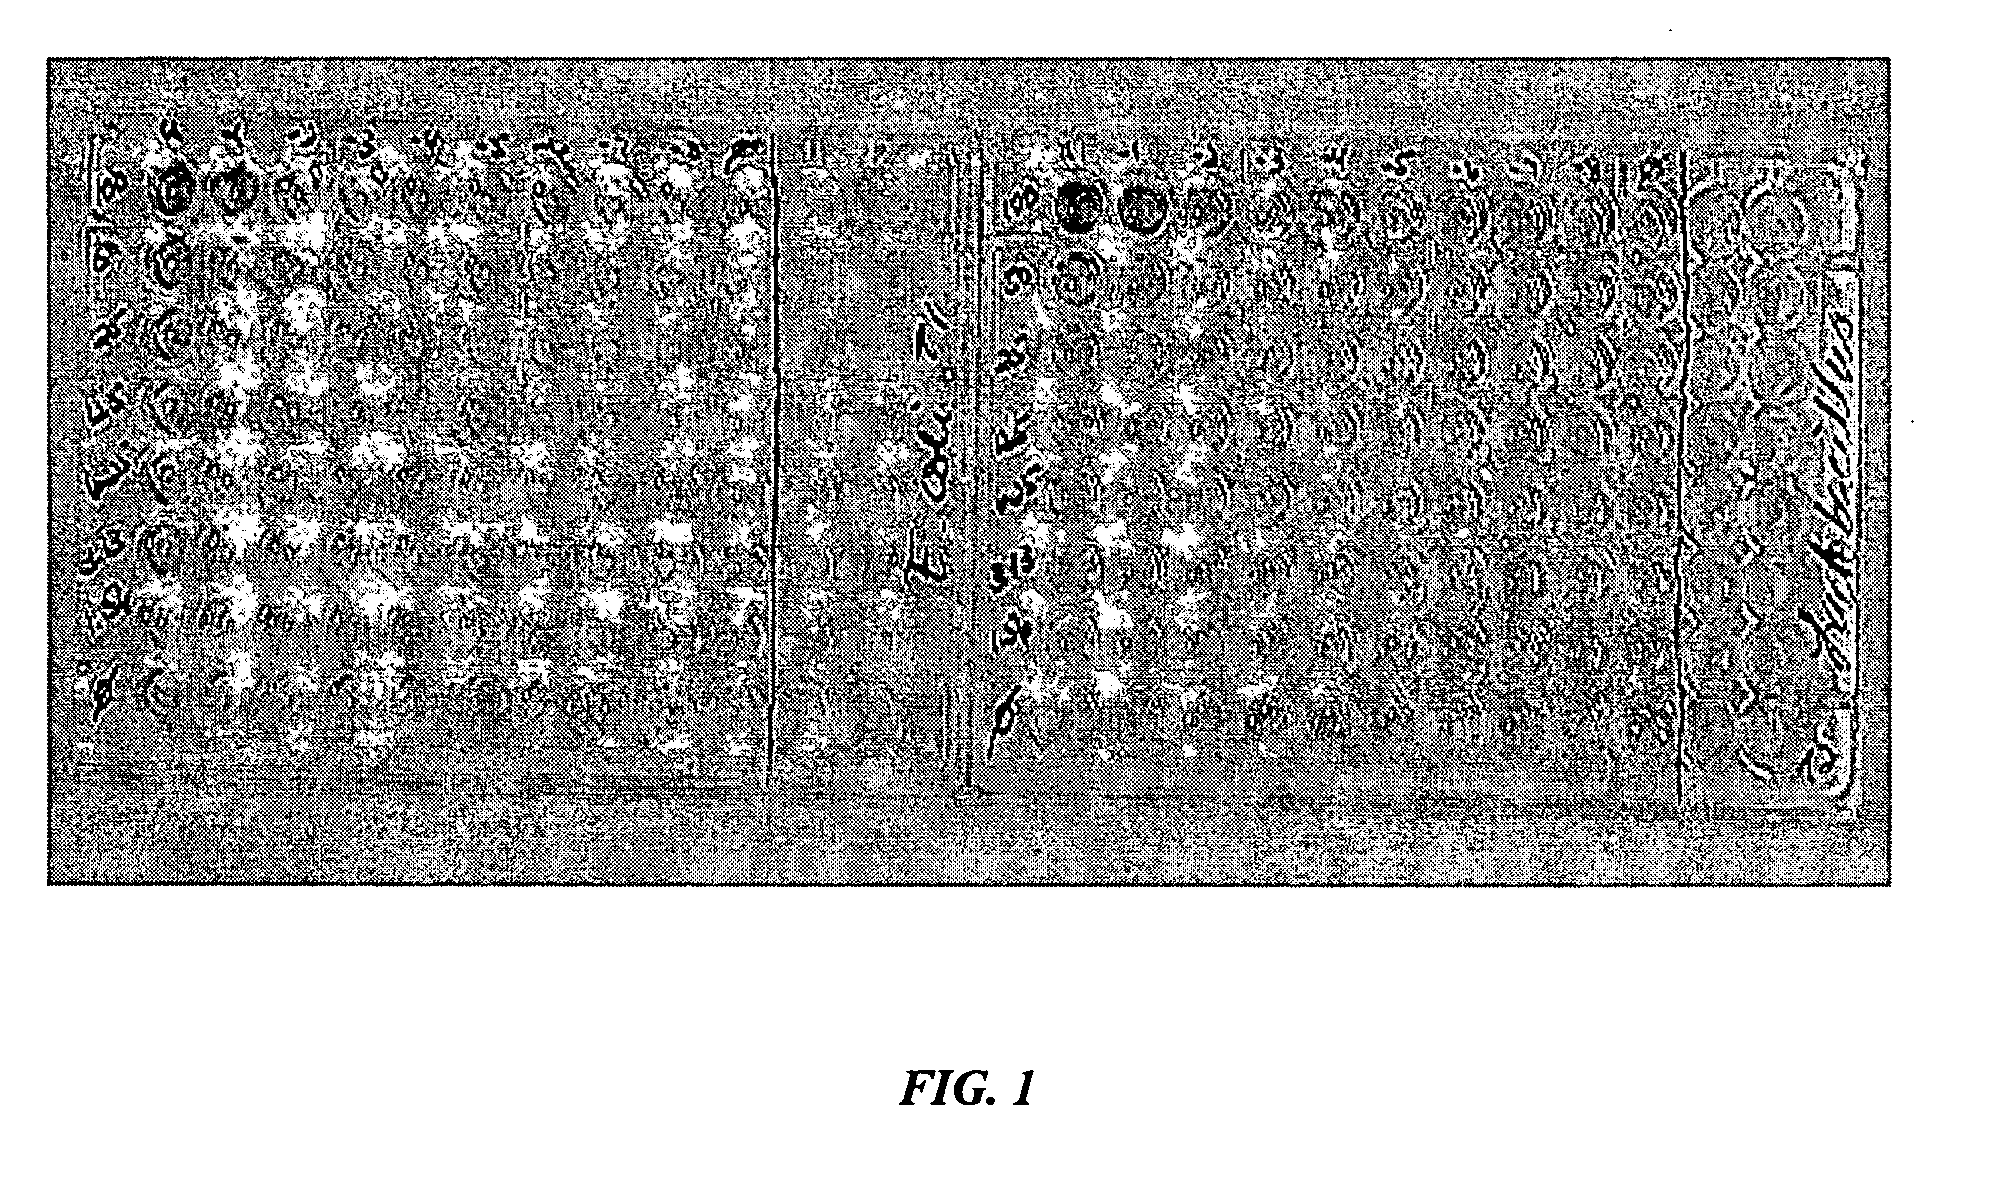 Methods, compositions, and kits for the detection of bacteria in a sample